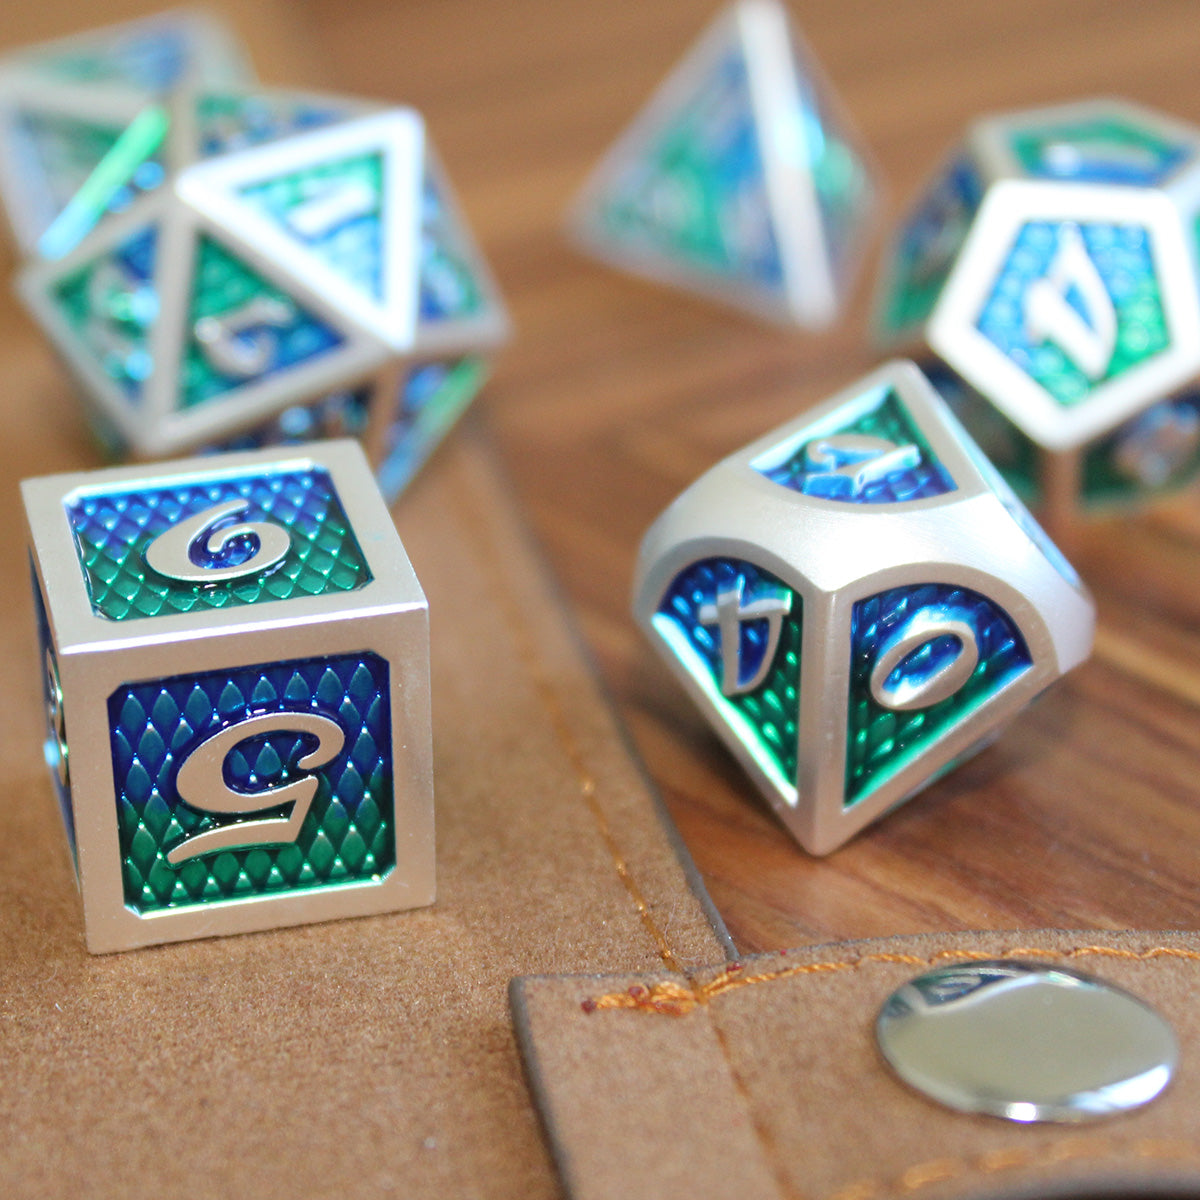 Metal Green Dice with Dragon Scales inset into it. 